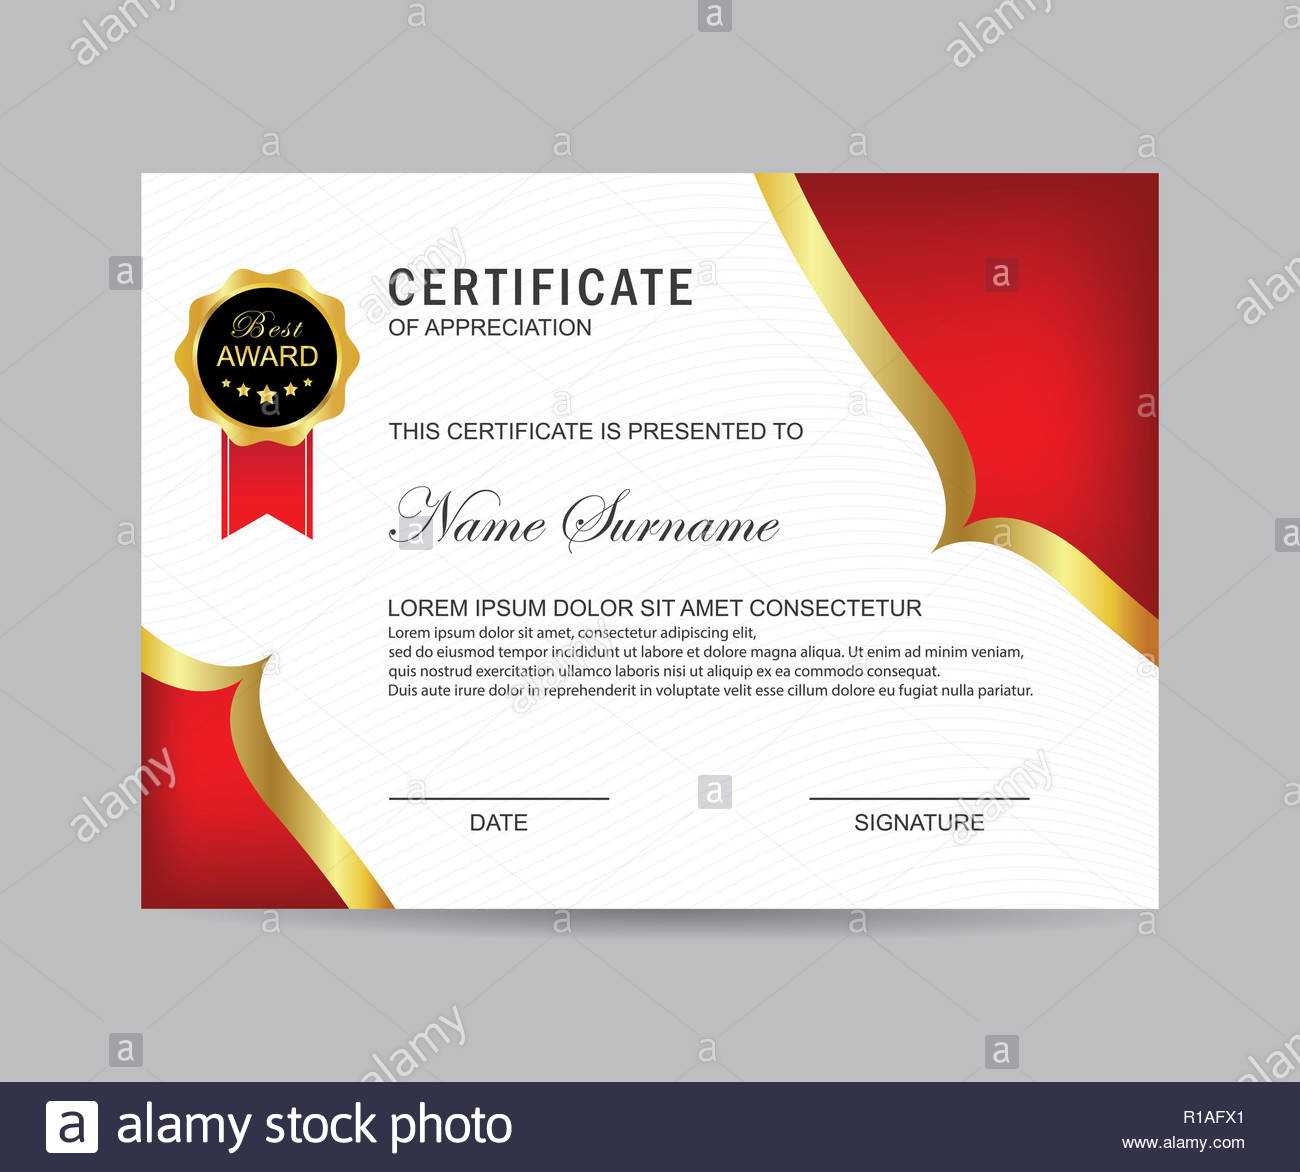 Modern Certificate Template And Background Stock Photo Throughout Borderless Certificate Templates